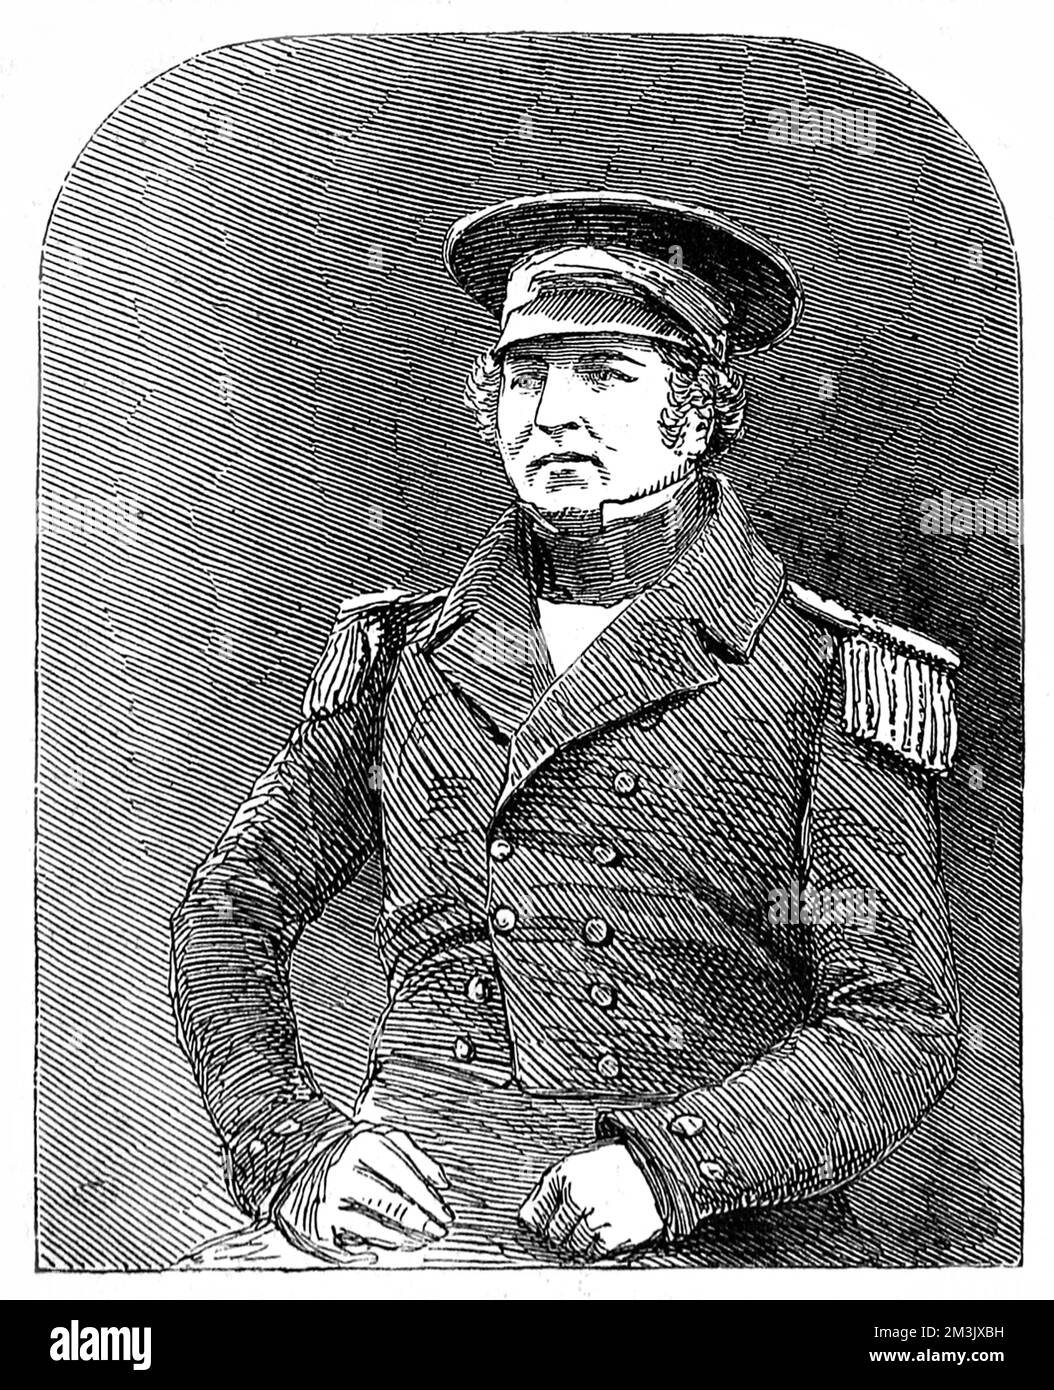 Engraving of Captain Francis Crozier (1796 - 1848), of HMS 'Terror', pictured shortly before departing on the ill-fated Franklin Arctic expedition of 1845.  In 1845 the British Admiralty sent two polar exploration ships, HMS 'Erebus' and HMS 'Terror', to look for the Northwest passage round the northern coast of Canada. The expedition, commanded by Sir John Franklin, disappeared from view late in 1845 and none of the men were ever seen again.   In fact the ships made it to the King William Island region, then got stuck in the ice. With supplies running out the surviving crew abandoned ship and Stock Photo